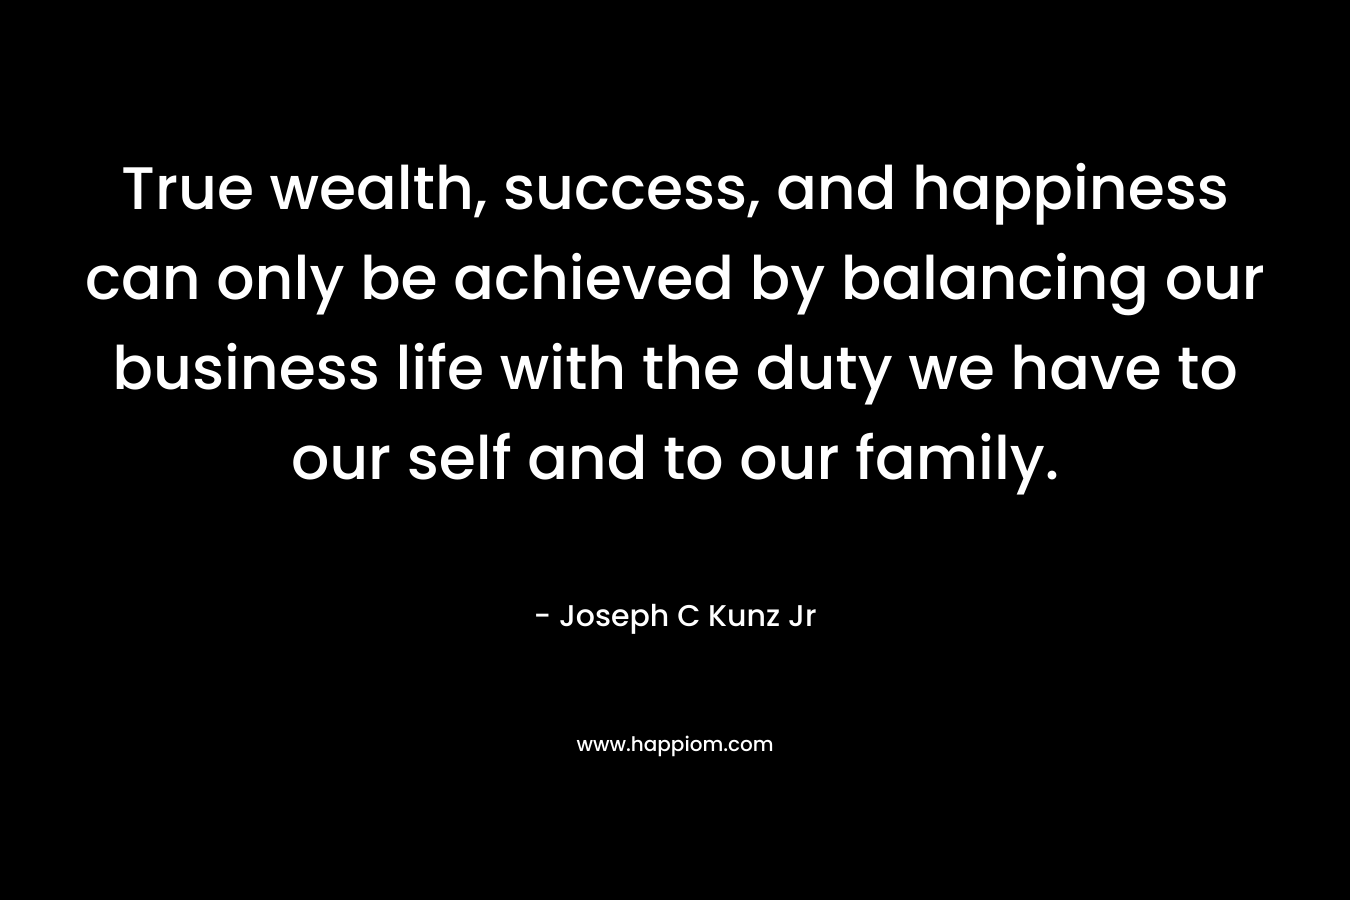 True wealth, success, and happiness can only be achieved by balancing our business life with the duty we have to our self and to our family.